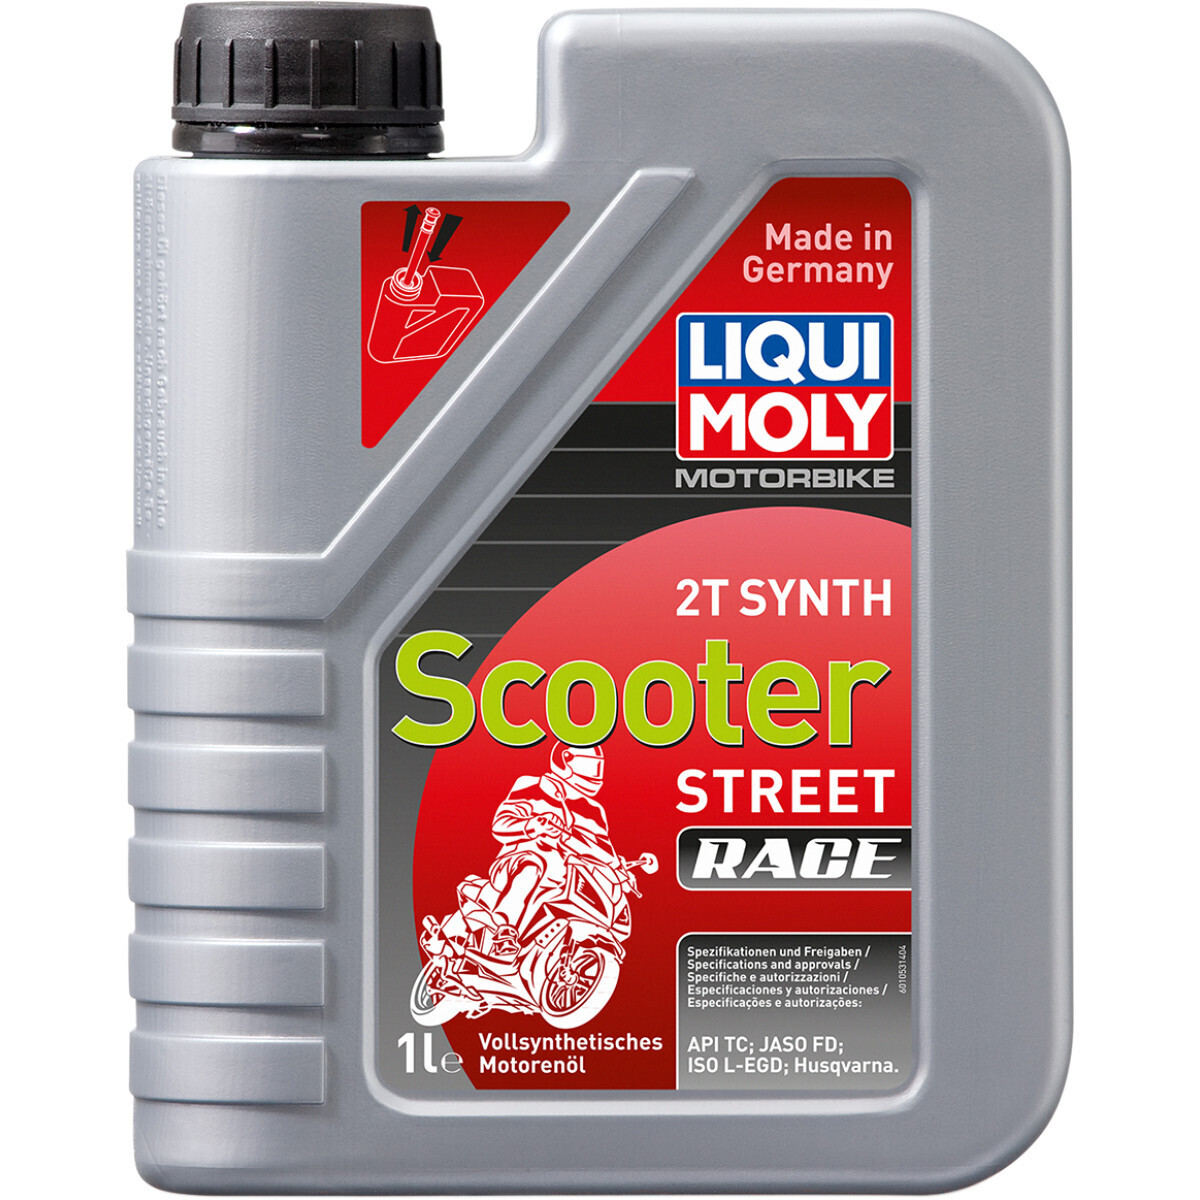 LIQUI MOLY
ENGINE OIL MOTORBIKE 2T FULLY SYNTHETIC 1 LITER